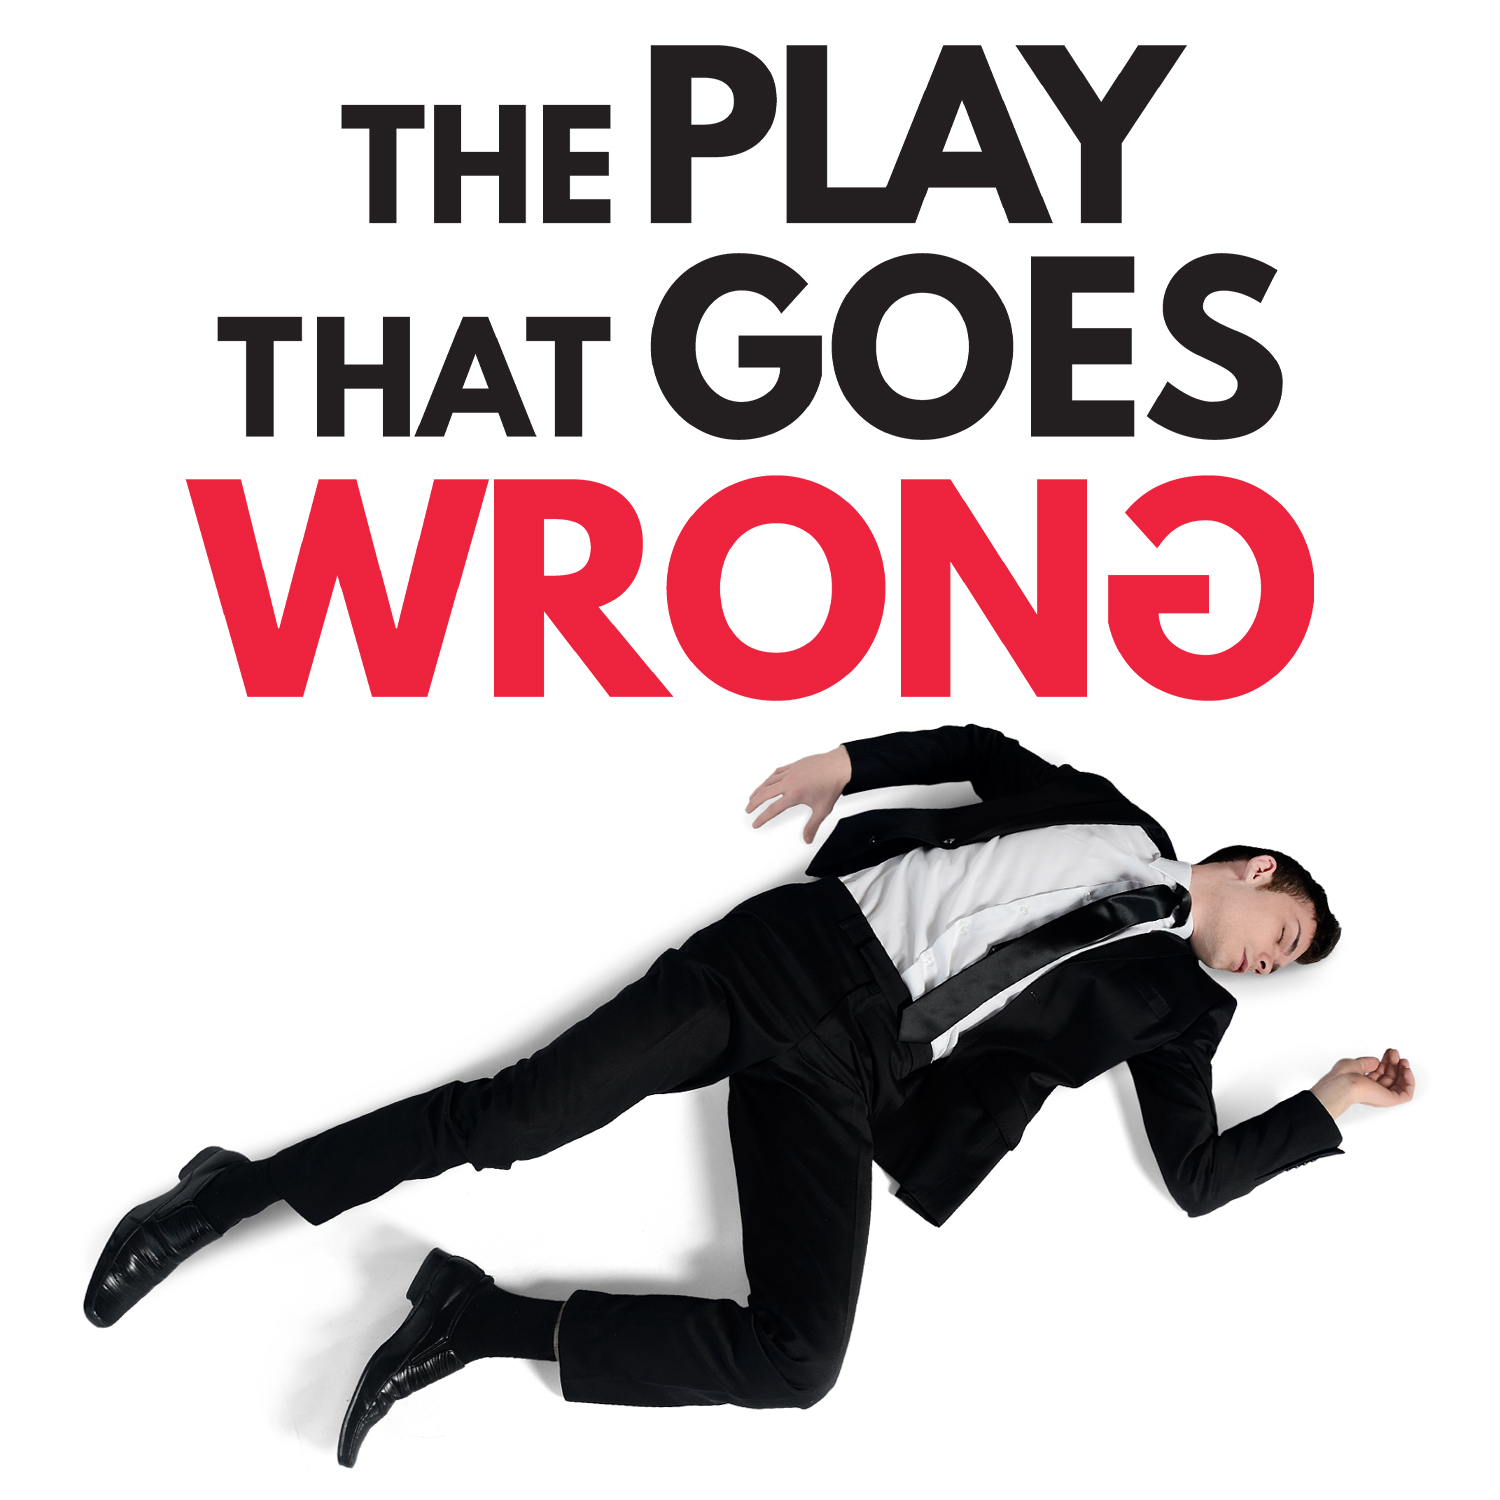 poster for "the play that goes wrong"